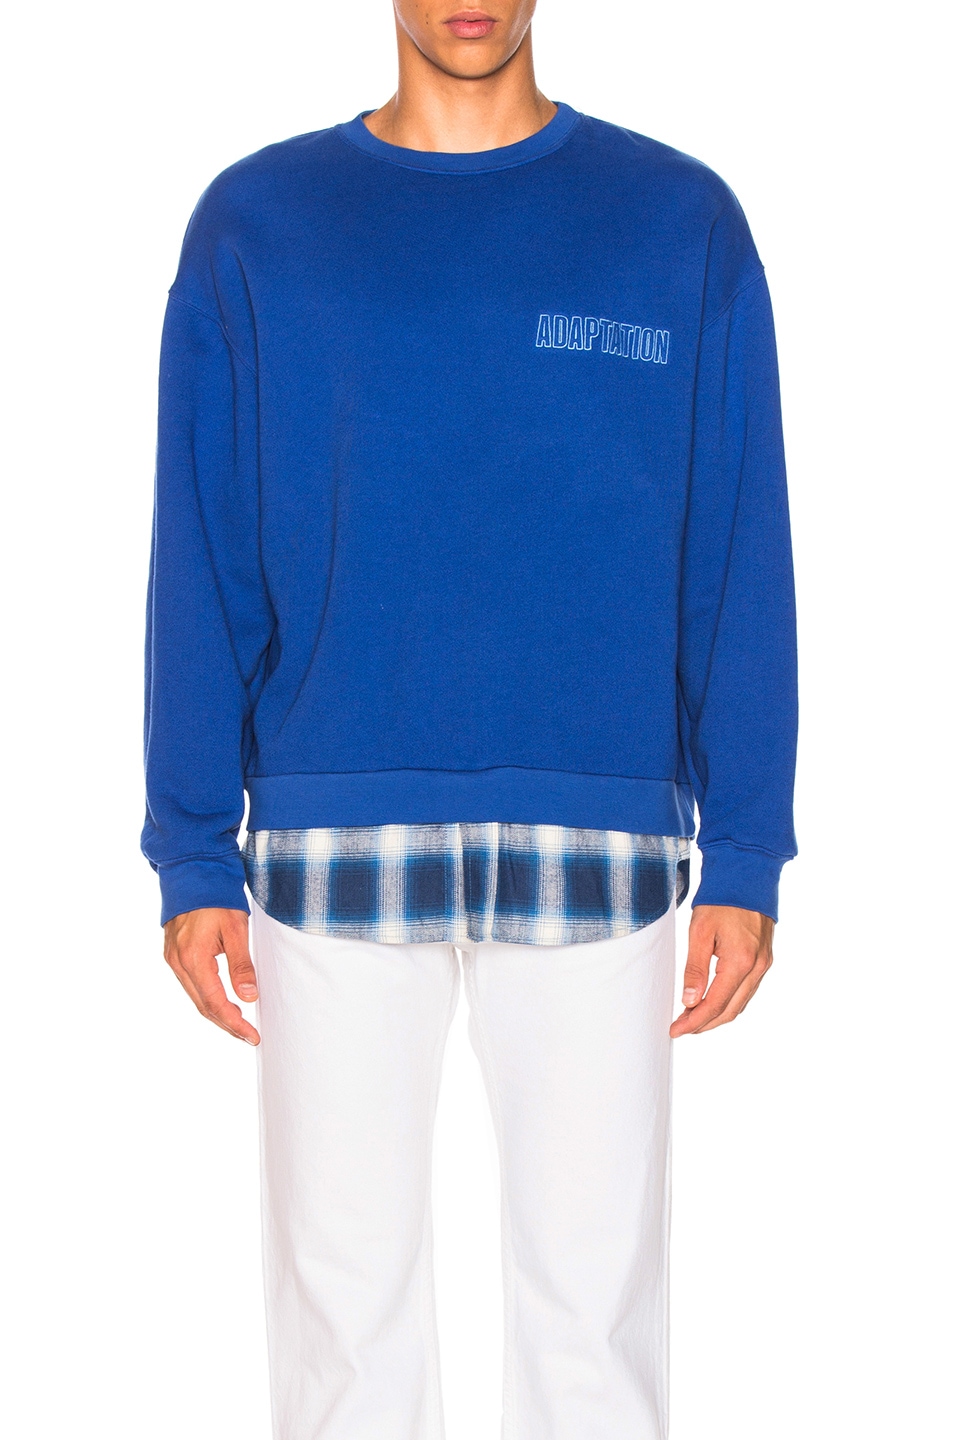 Image 1 of Adaptation Crewneck With Shirt Tail in Blue Chrome